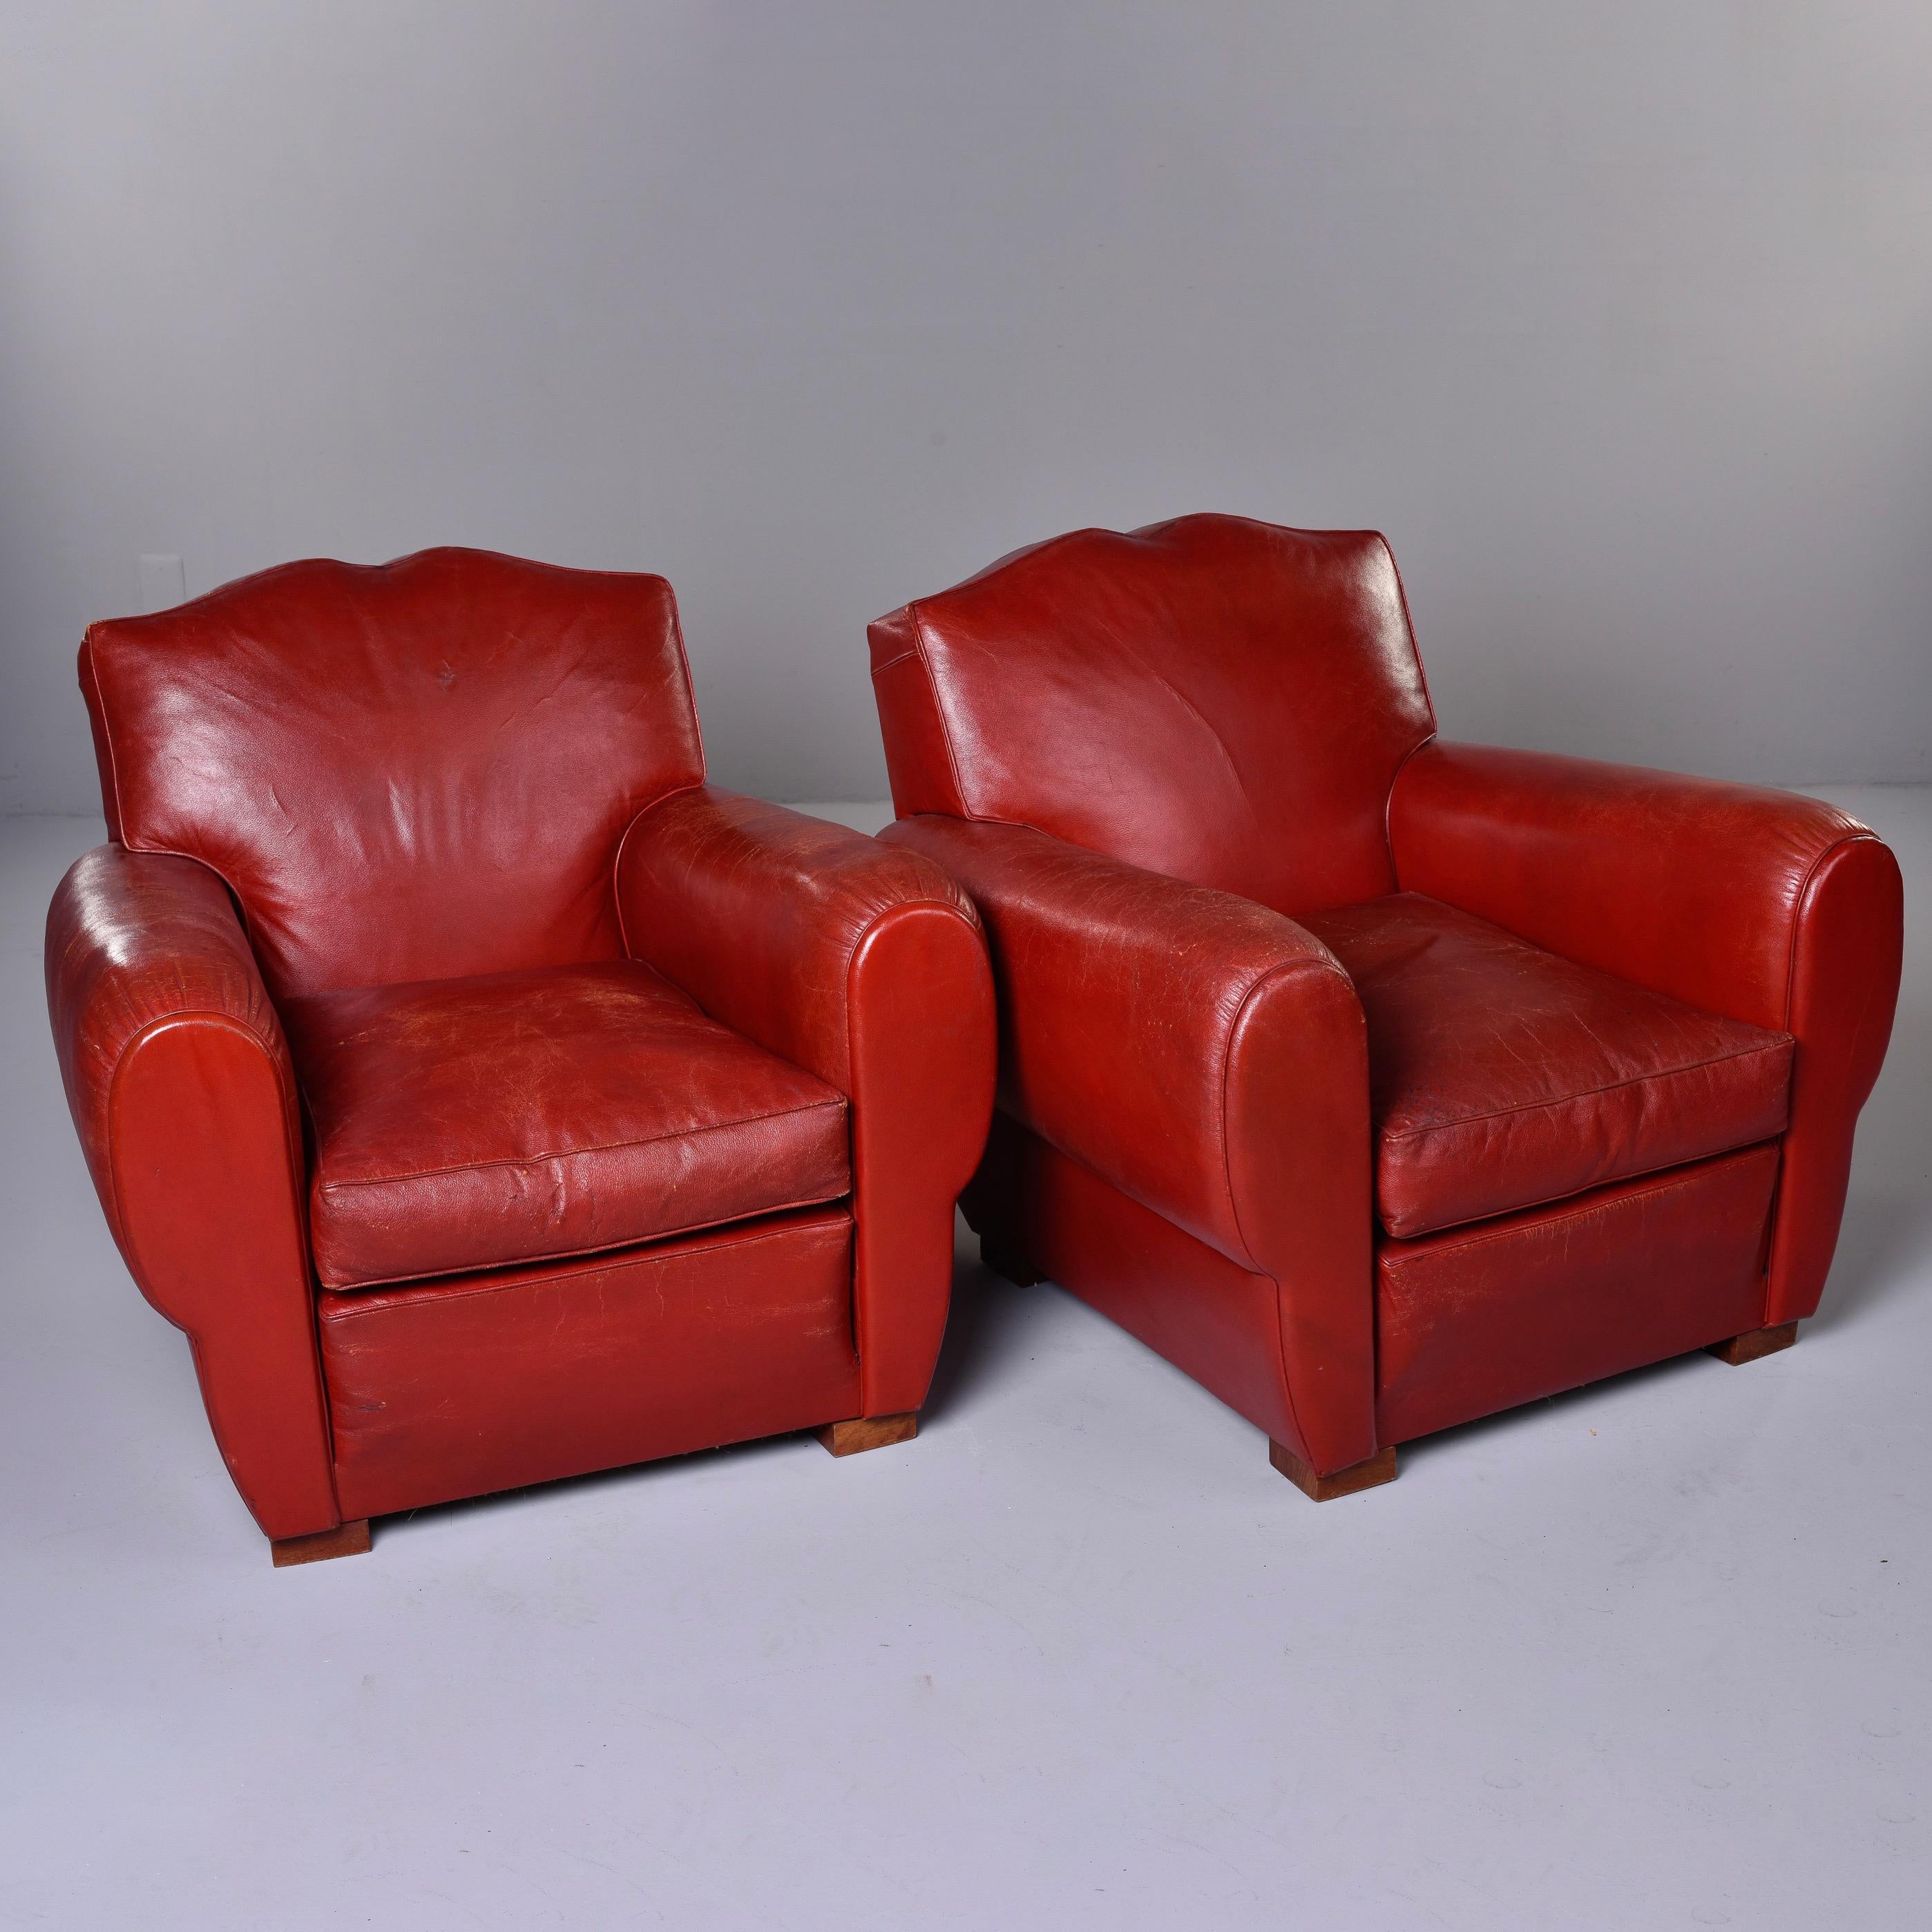 20th Century Pair of Vintage Art Deco Style Red Leather Club Chairs with Mustache Back